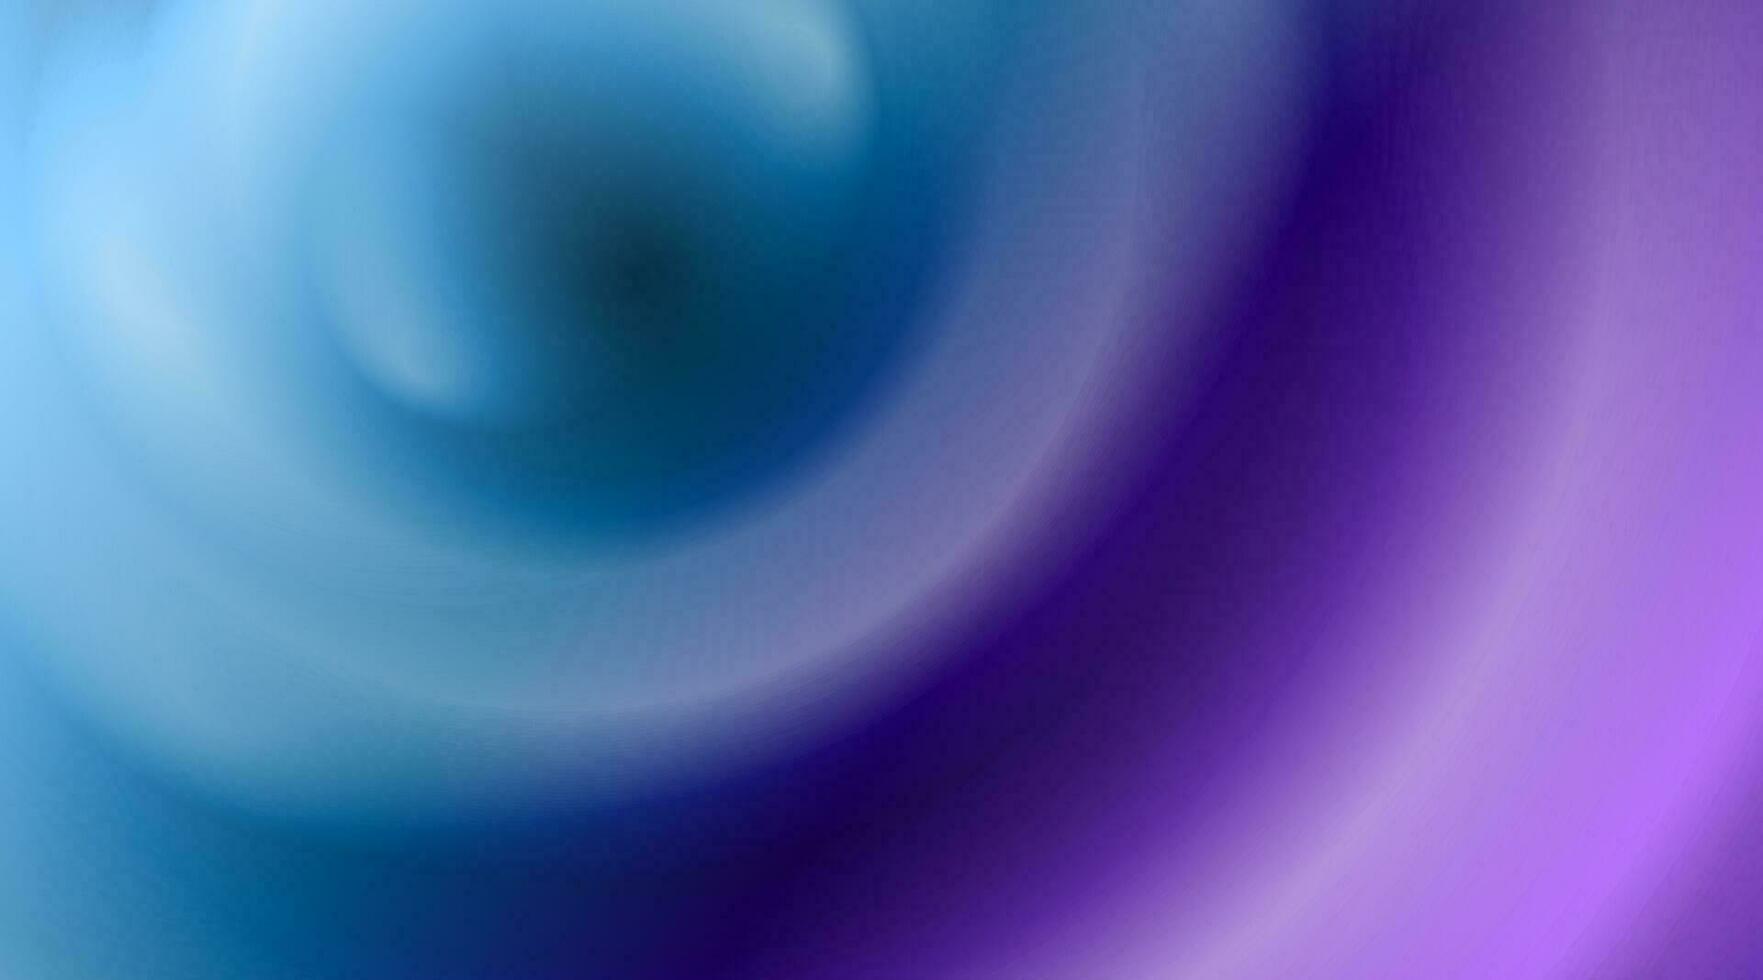 Blue violet glossy smooth circles abstract background vector